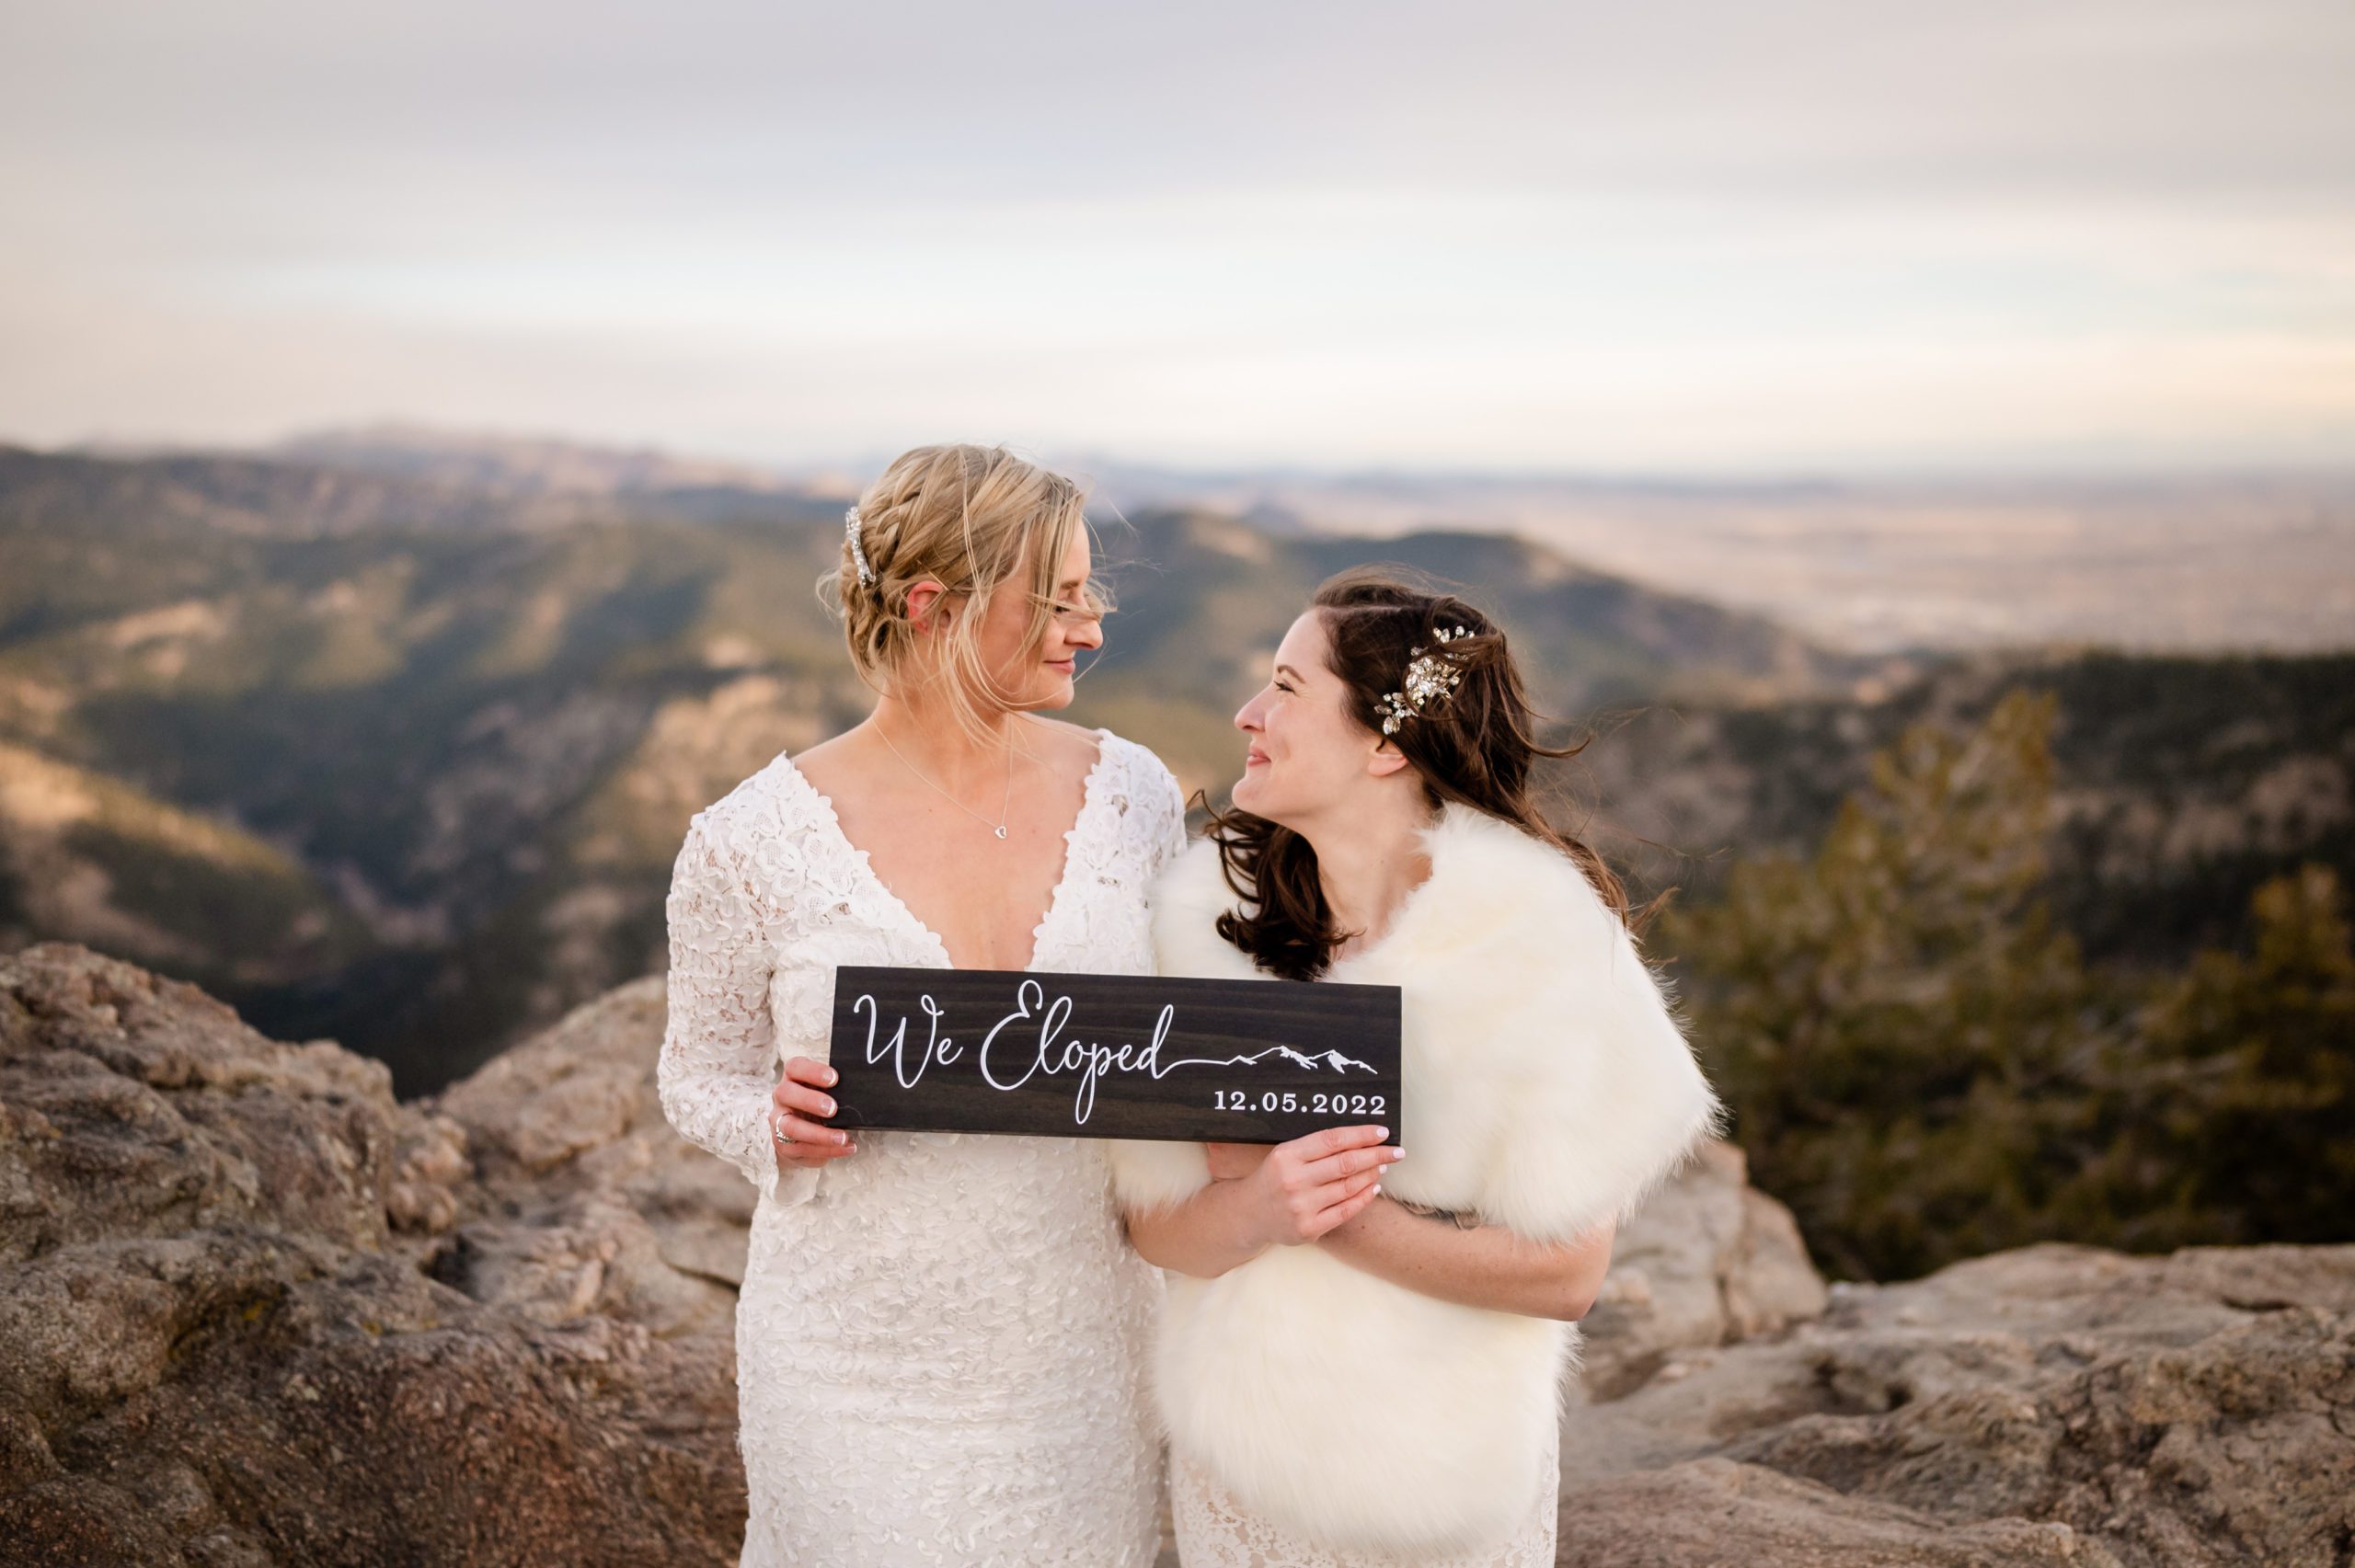 The bride's look at each other while holding their "We eloped" sign at their Lost Gulch elopement. 